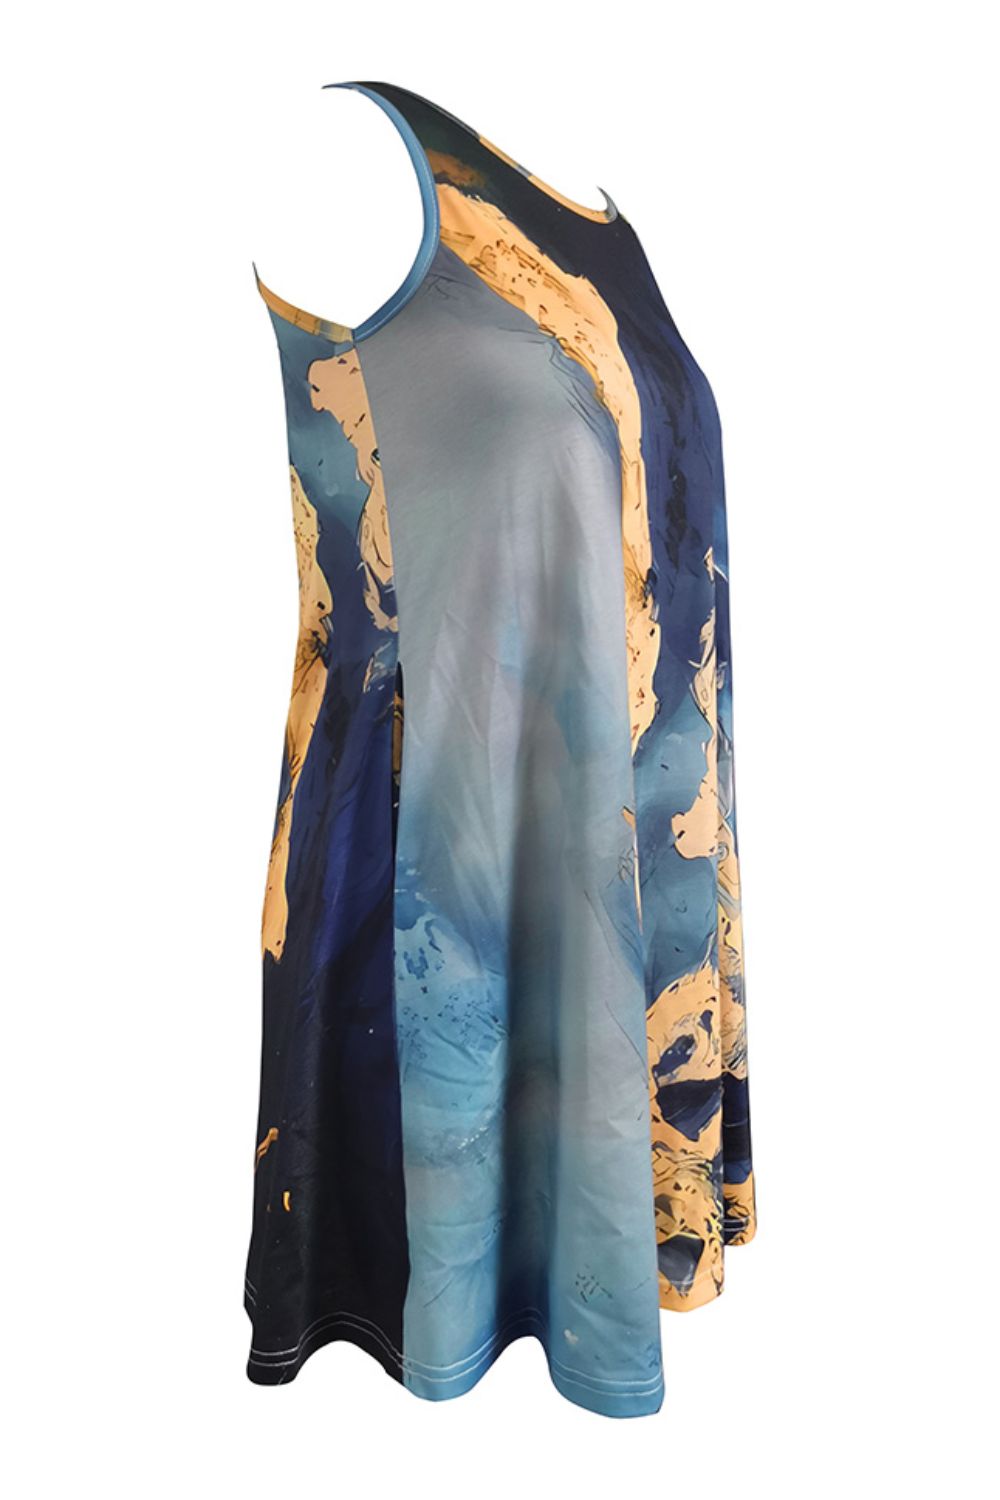 Women’s Abstract Print Round Neck Sleeveless Dress with Pockets